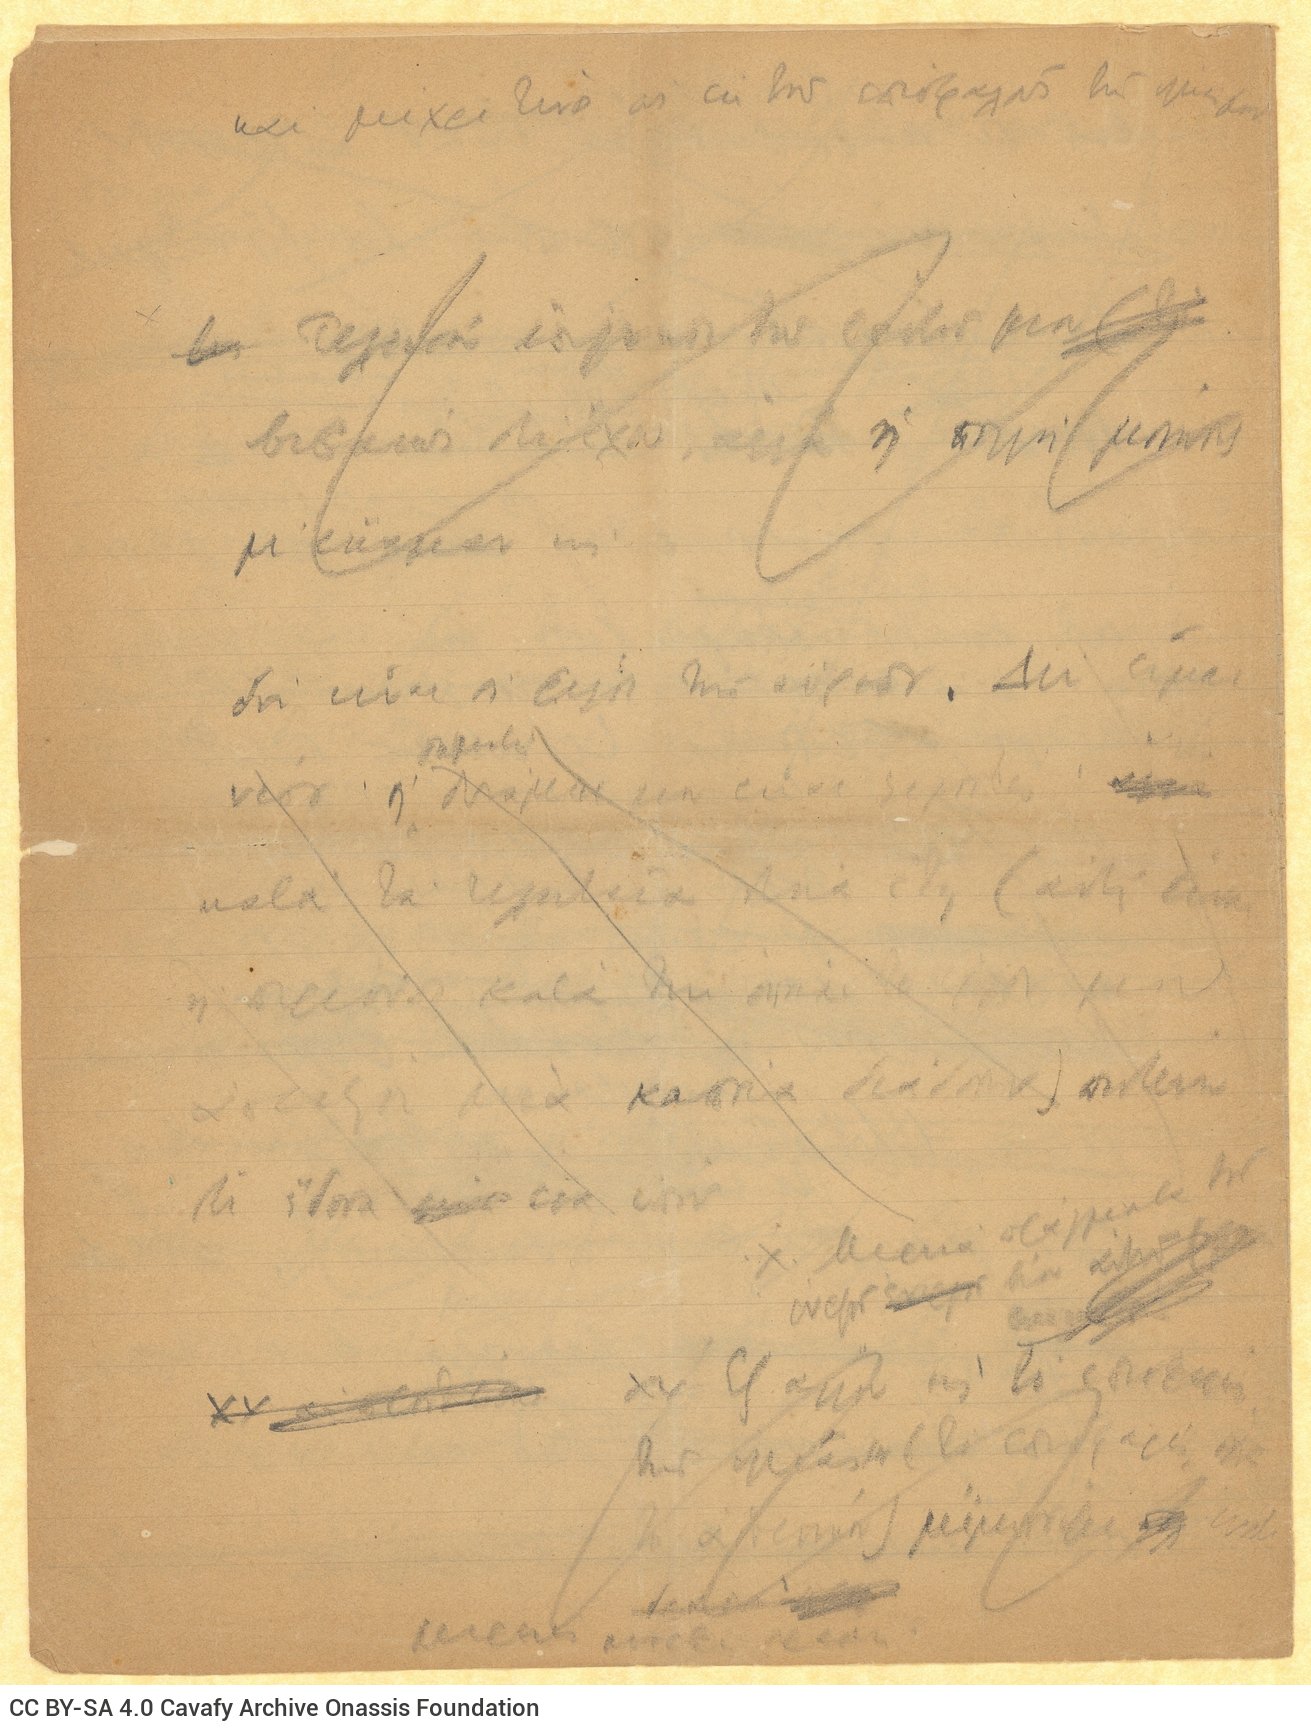 Handwritten draft letter by Cavafy, probably to his brother John, in two double sheet notepapers. The last two pages are blan